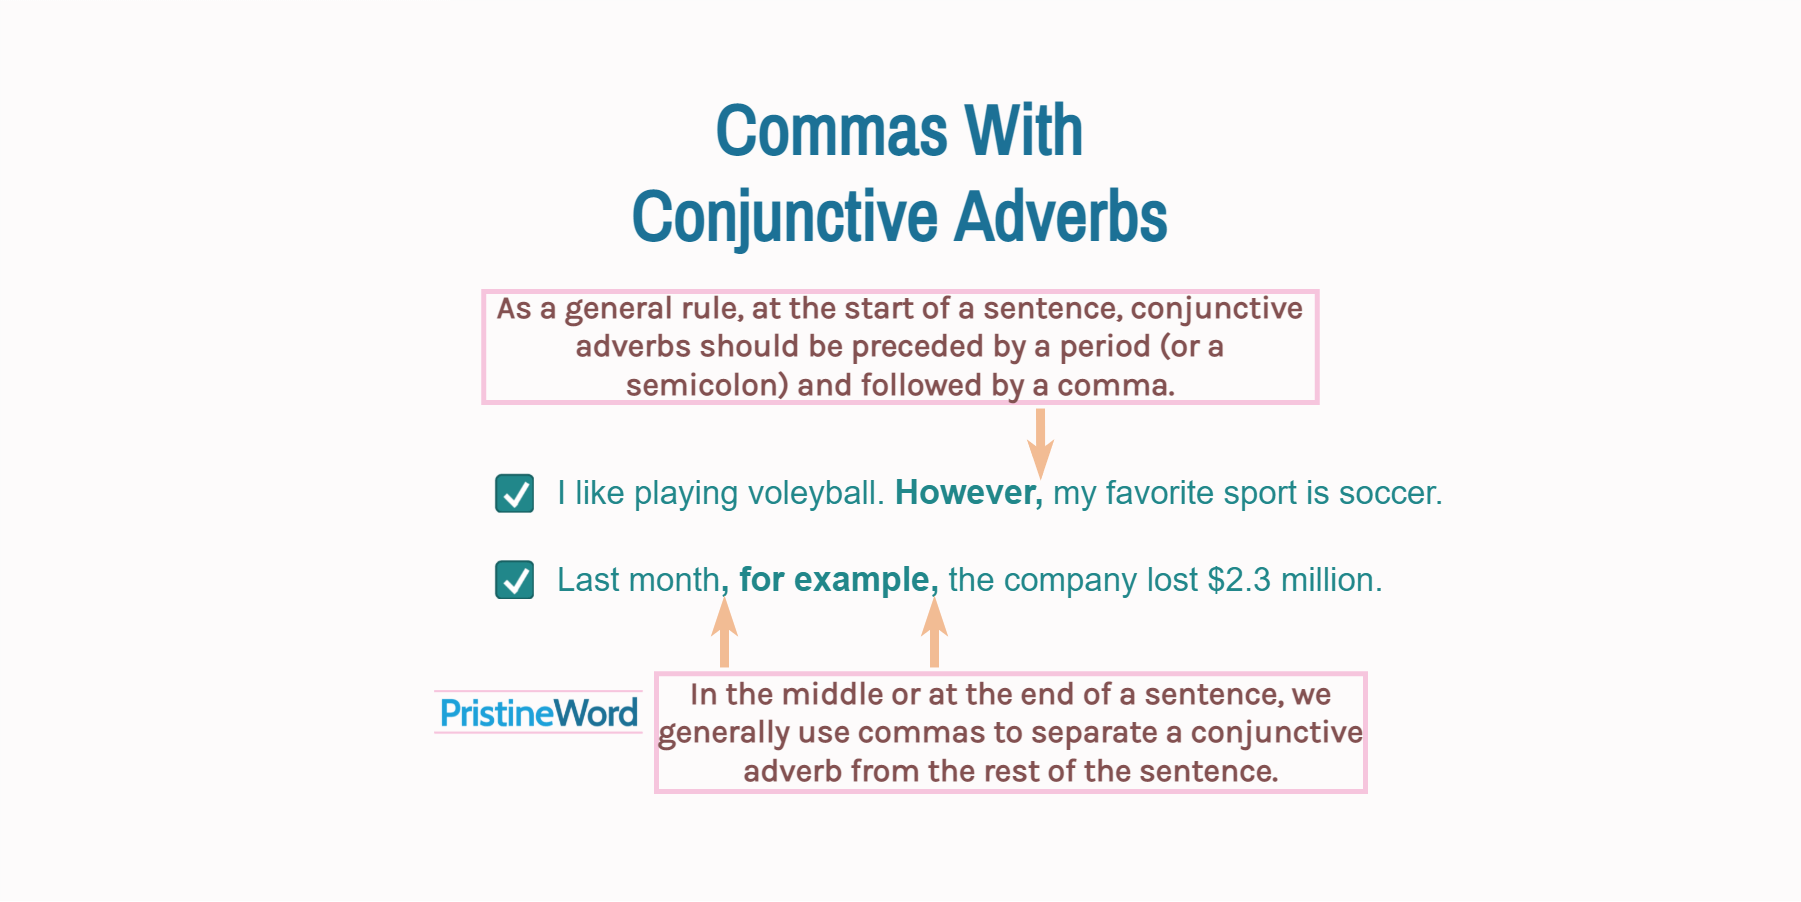 Commas and Conjunctive Adverbs